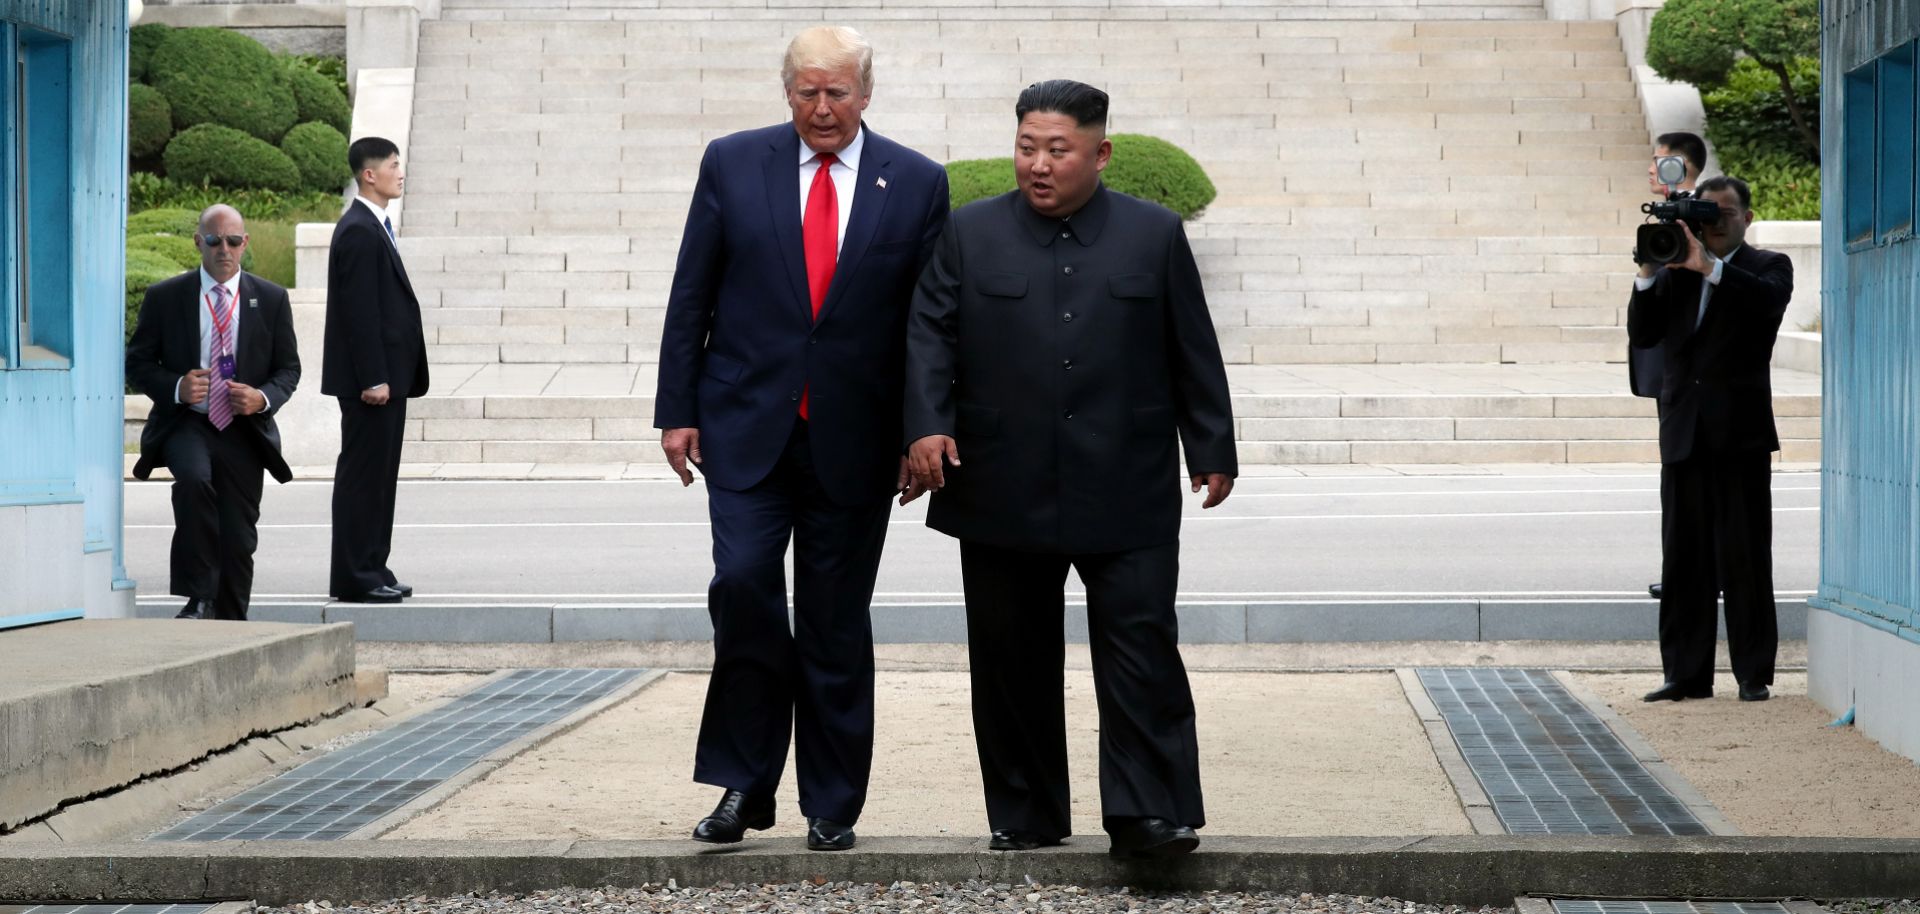 U.S. President Donald Trump and North Korean leader Kim Jong Un meet at the border village of Panmunjom in the Demilitarized Zone separating South and North Korea on June 30, 2019.